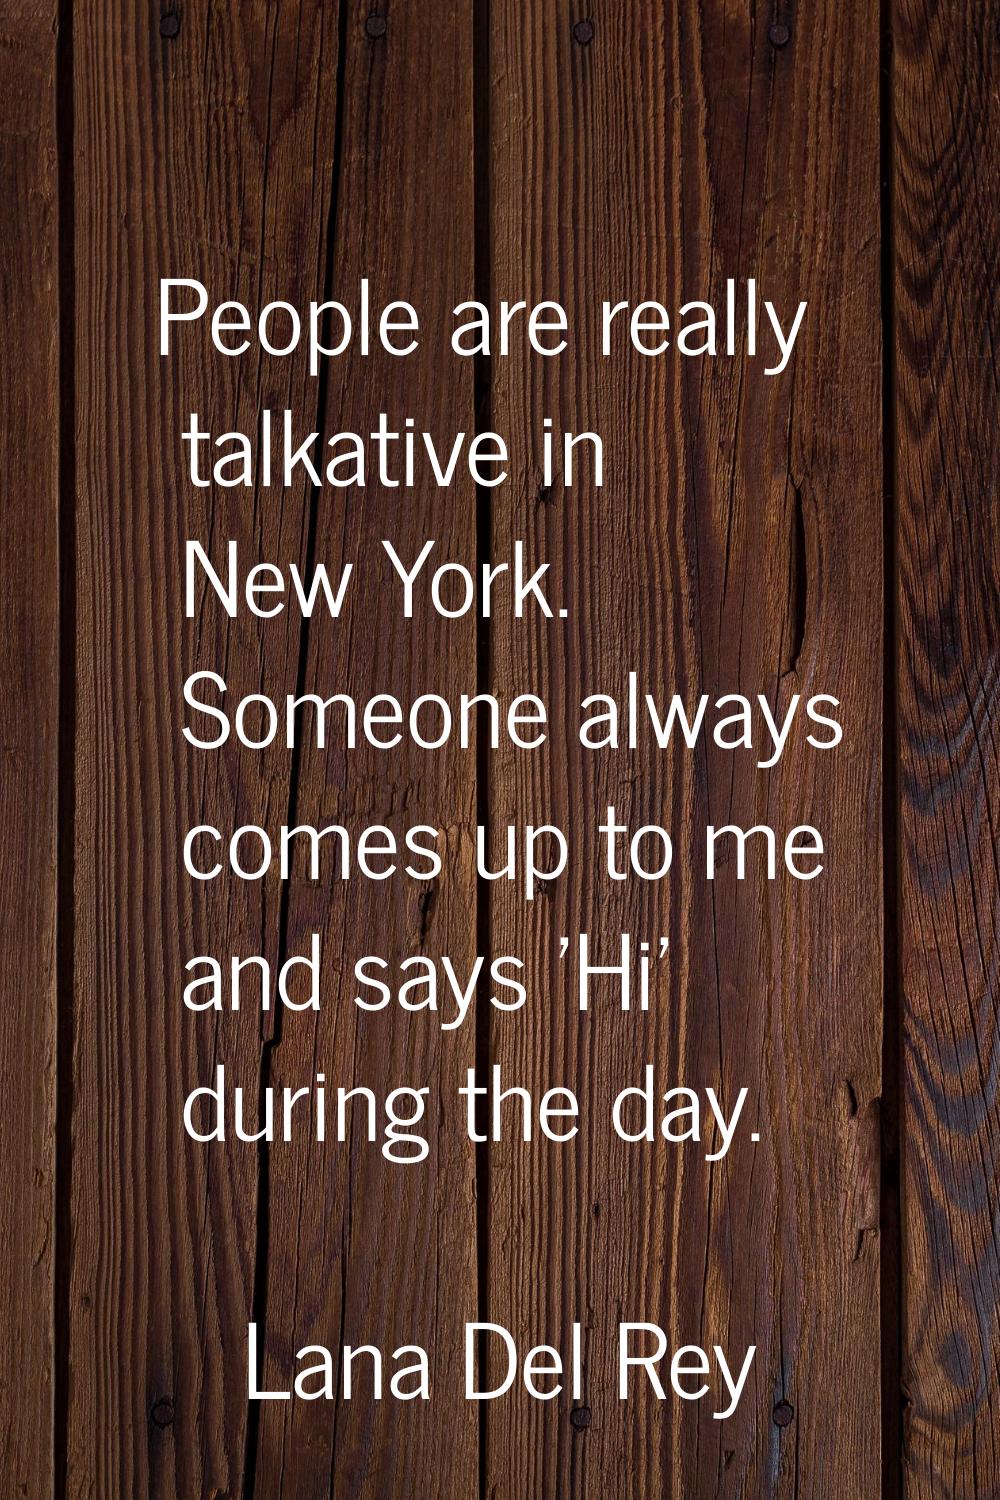 People are really talkative in New York. Someone always comes up to me and says 'Hi' during the day